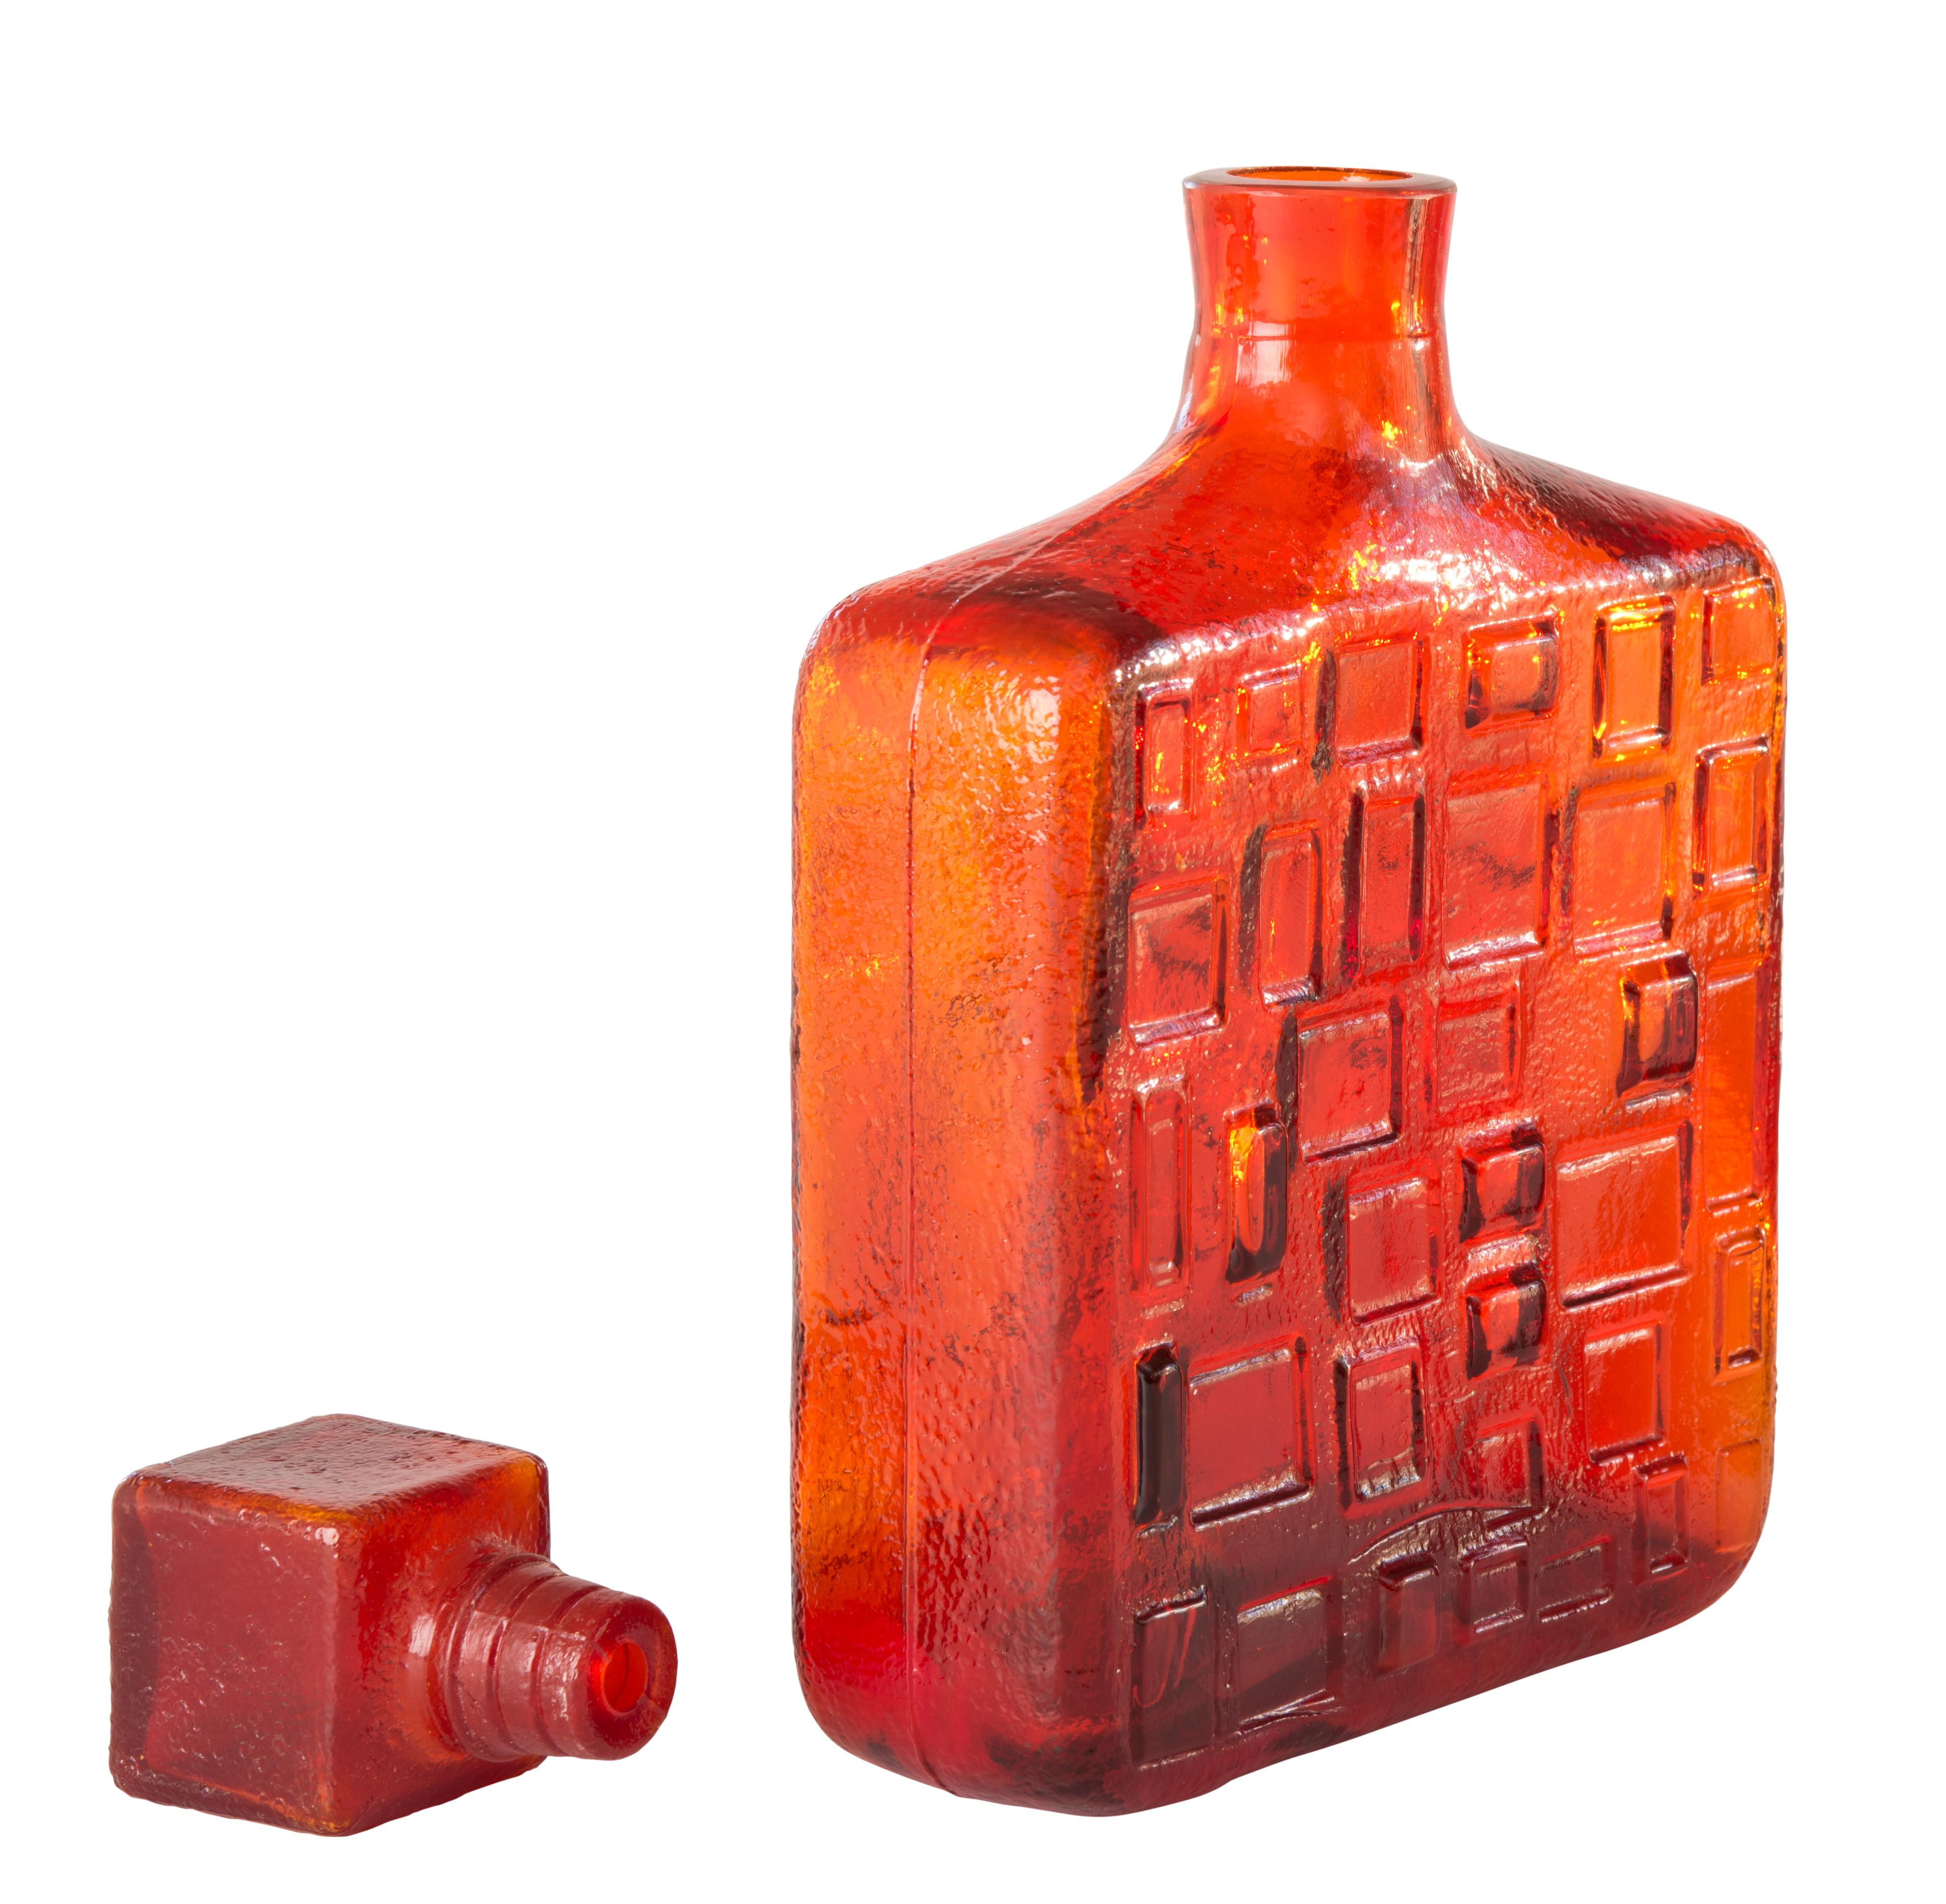 Mid-Century Modern Empoli Pressed Glass Decanter, Made in Italy, circa 1960